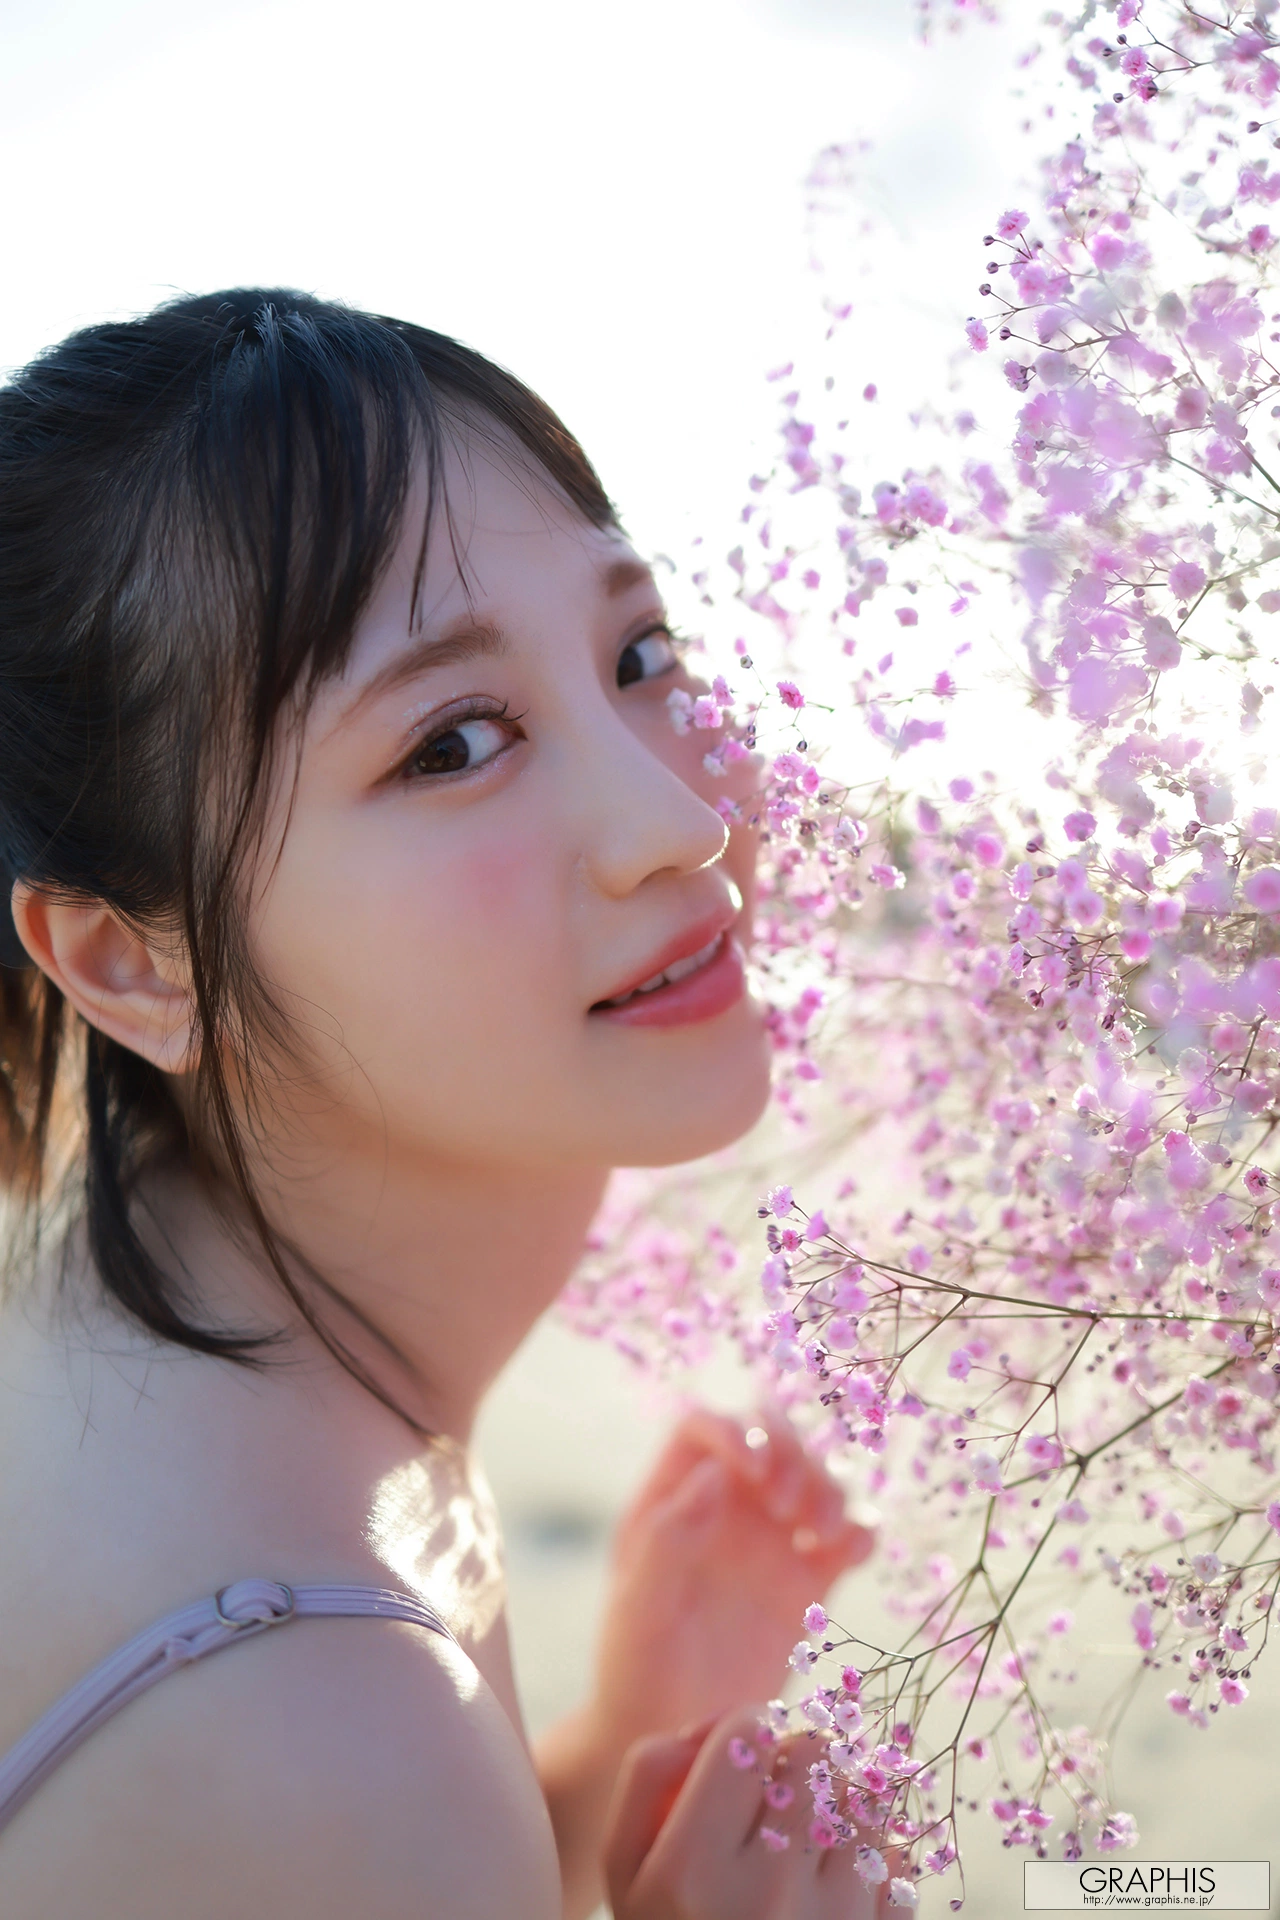 Rikka Ono 小野六花, [Graphis] Gals Beautiful Bouquet Vol.04